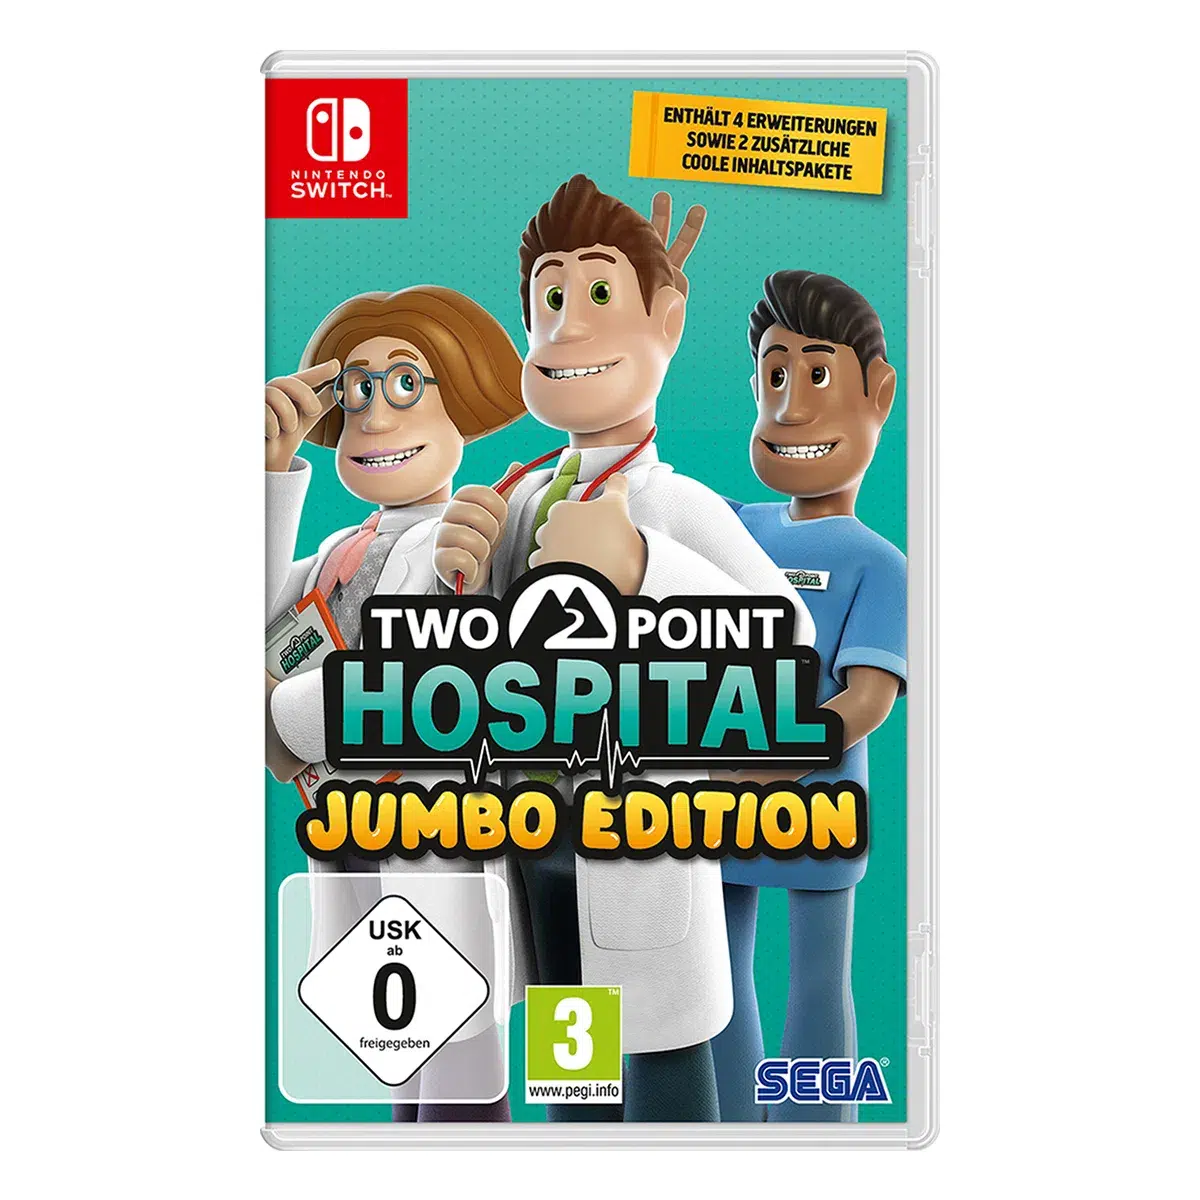 Two Point Hospital: Jumbo Edition (Switch)